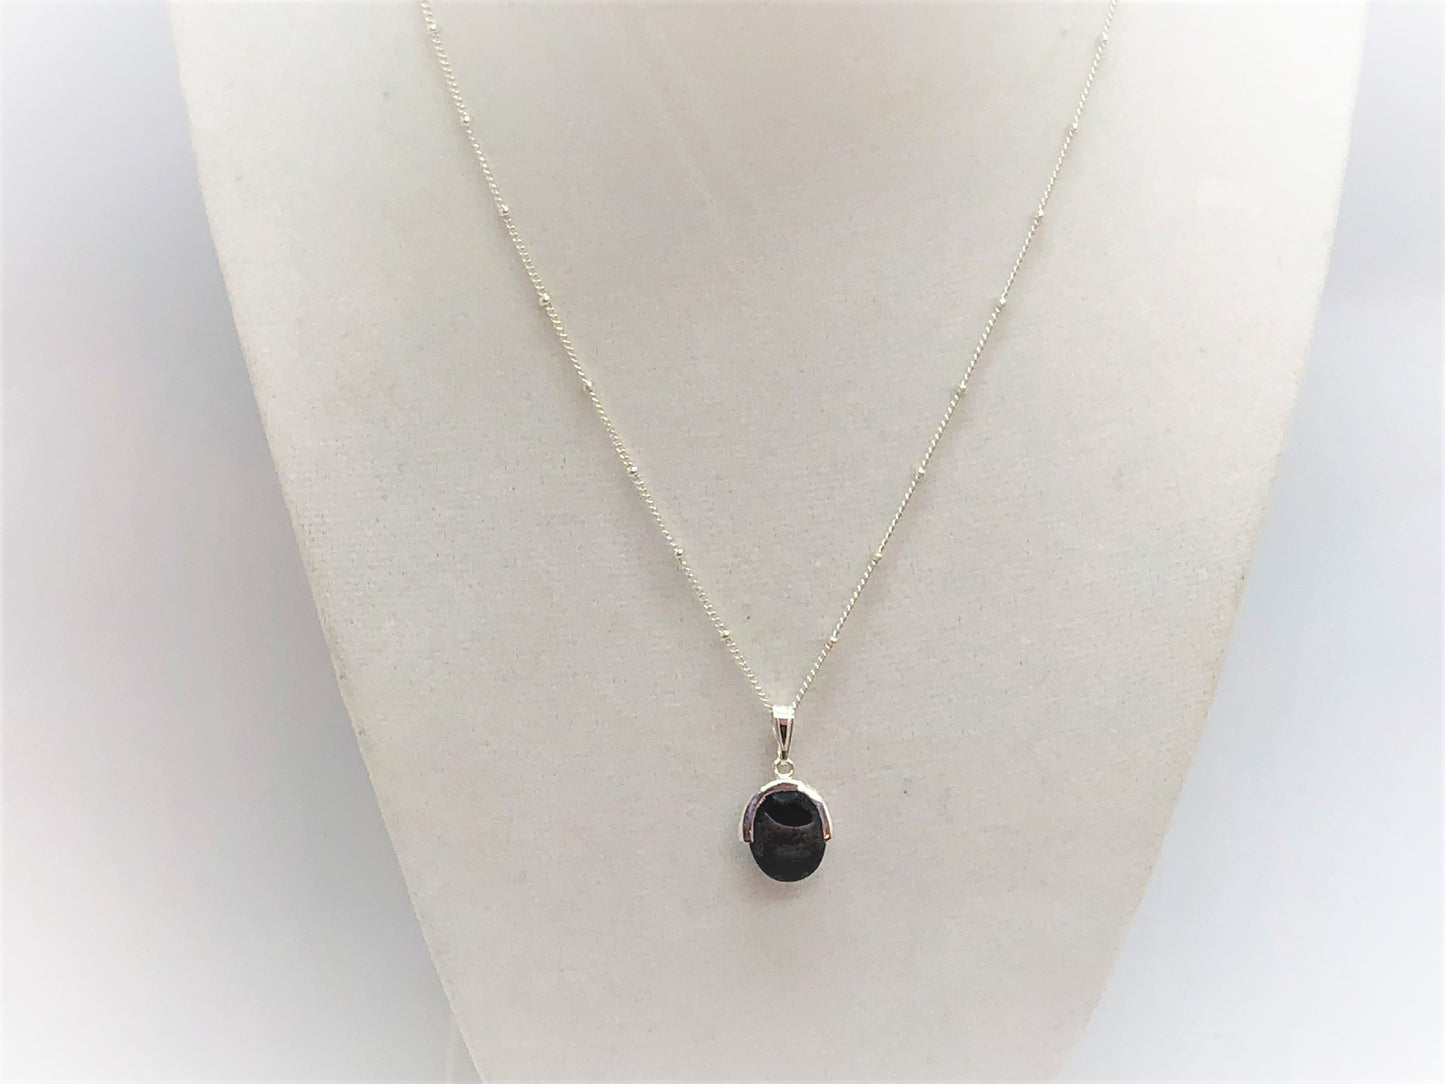 Gemstone Station Necklace - Emmis Jewelry, Necklace, [product_color]